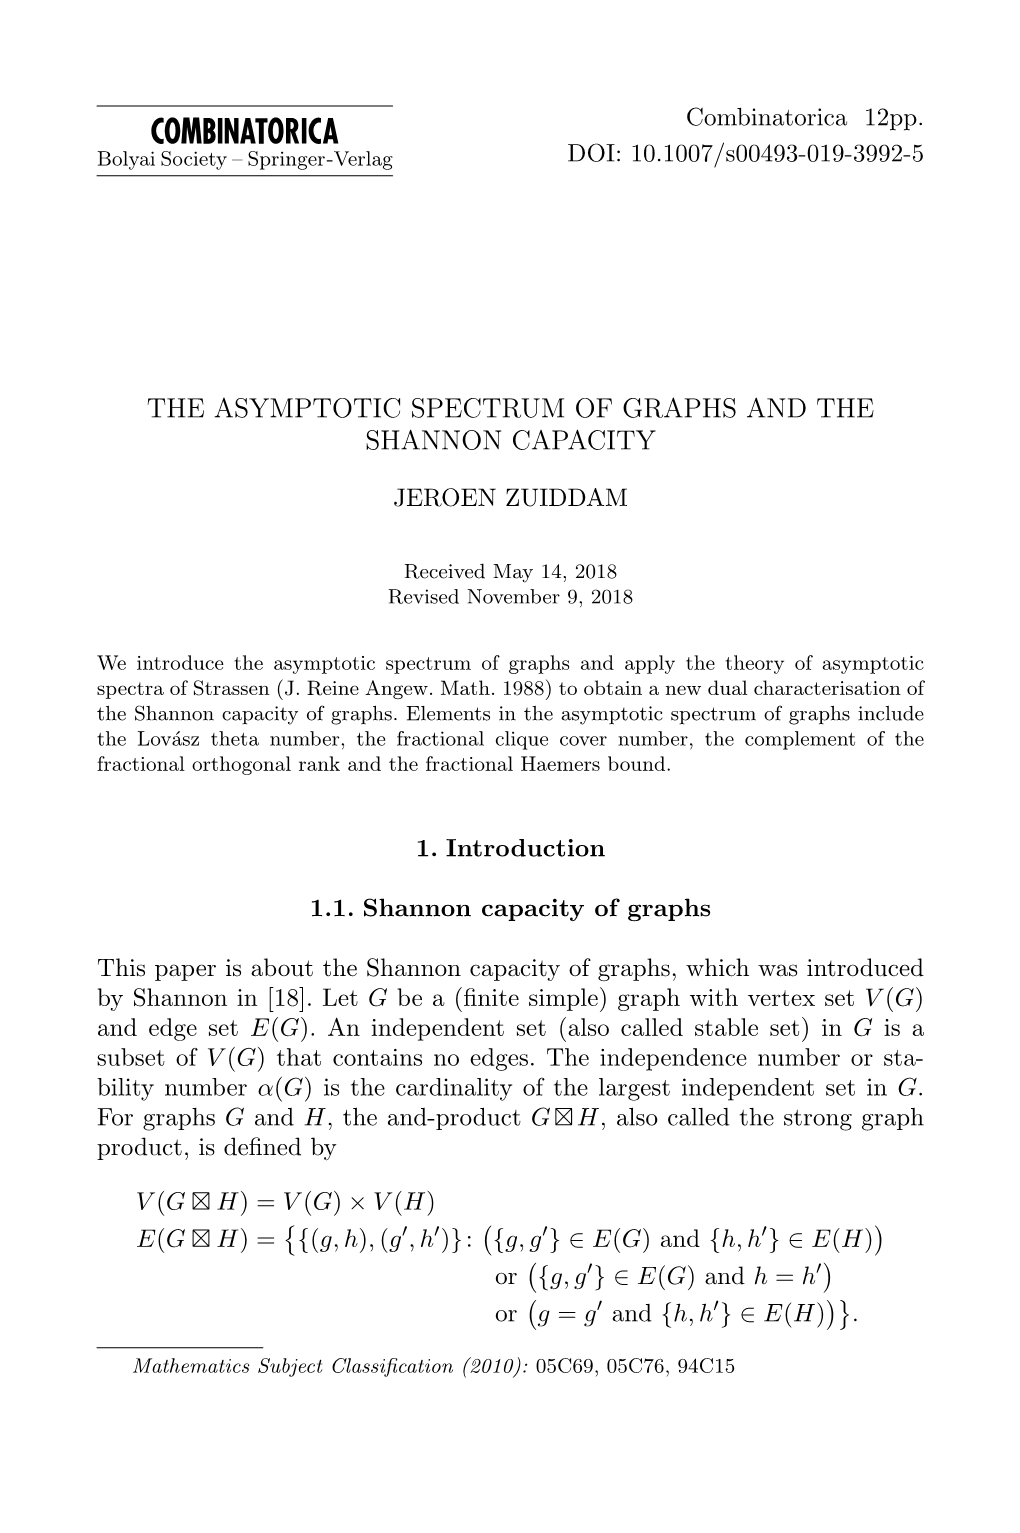 The Asymptotic Spectrum of Graphs and the Shannon Capacity